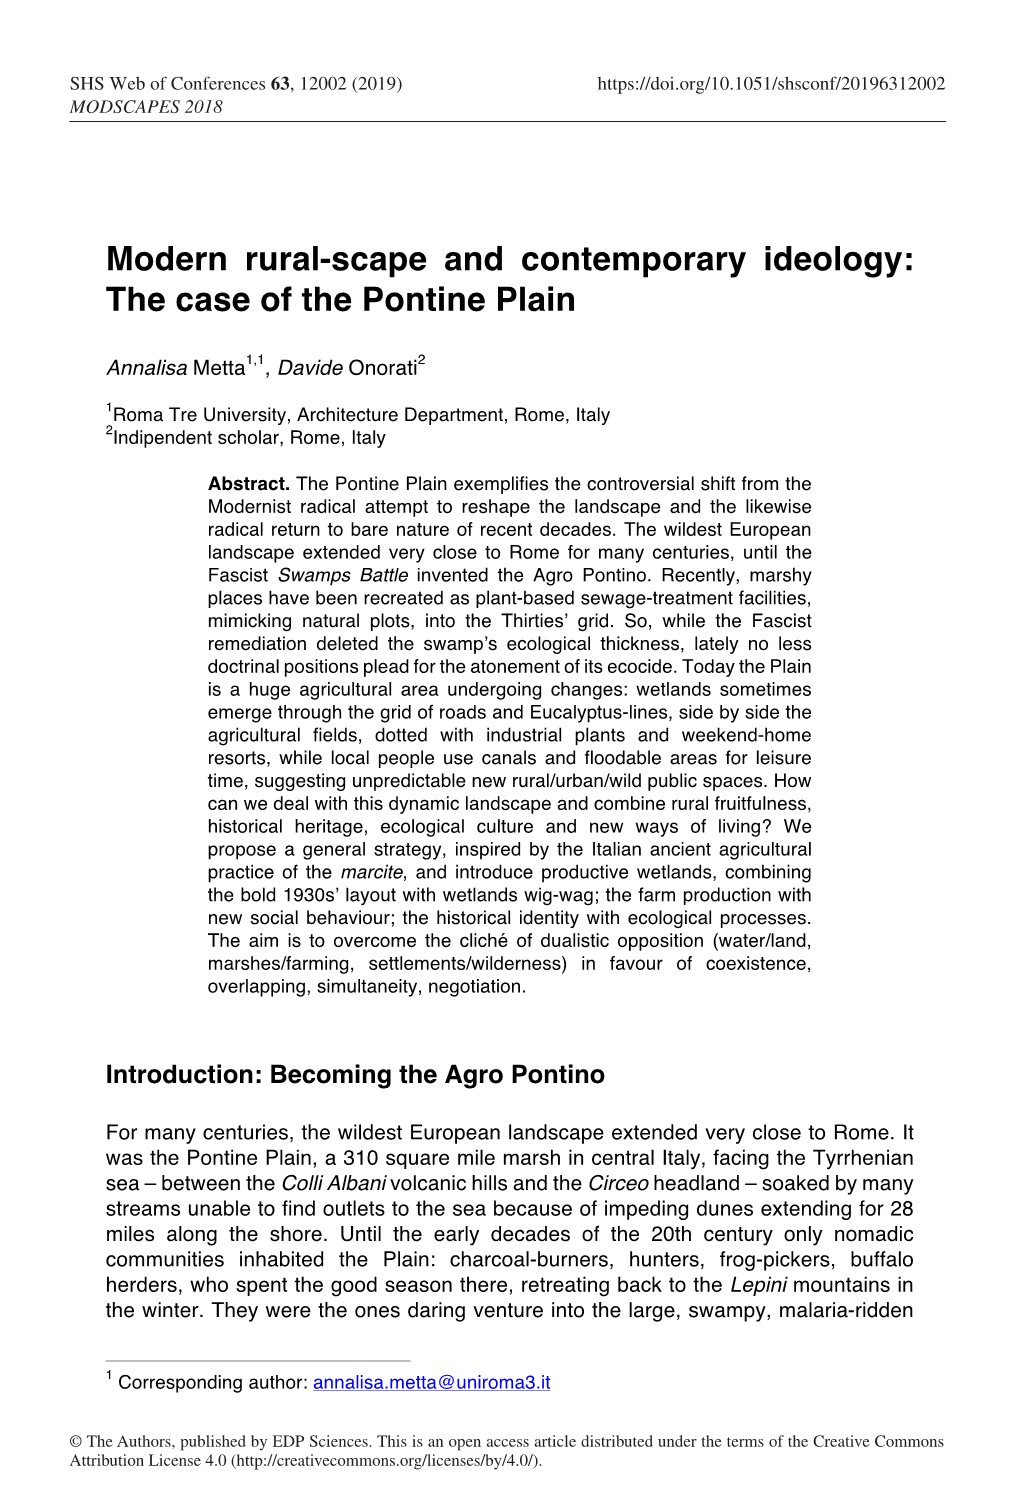 Modern Rural-Scape and Contemporary Ideology: the Case of the Pontine Plain